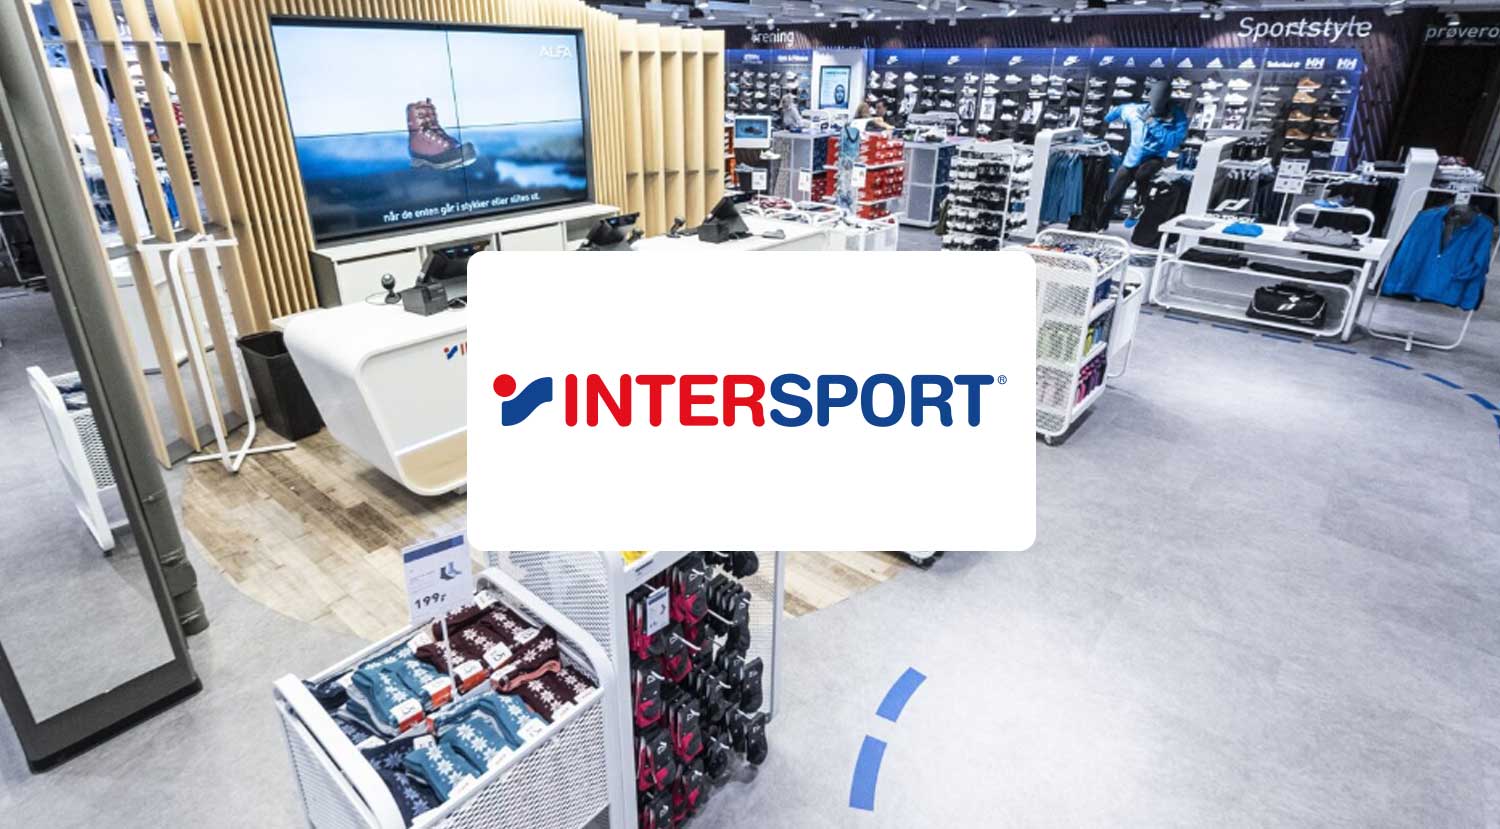 IIC-Intersport fuels hybrid work and hypergrowth by using OfficeExpert